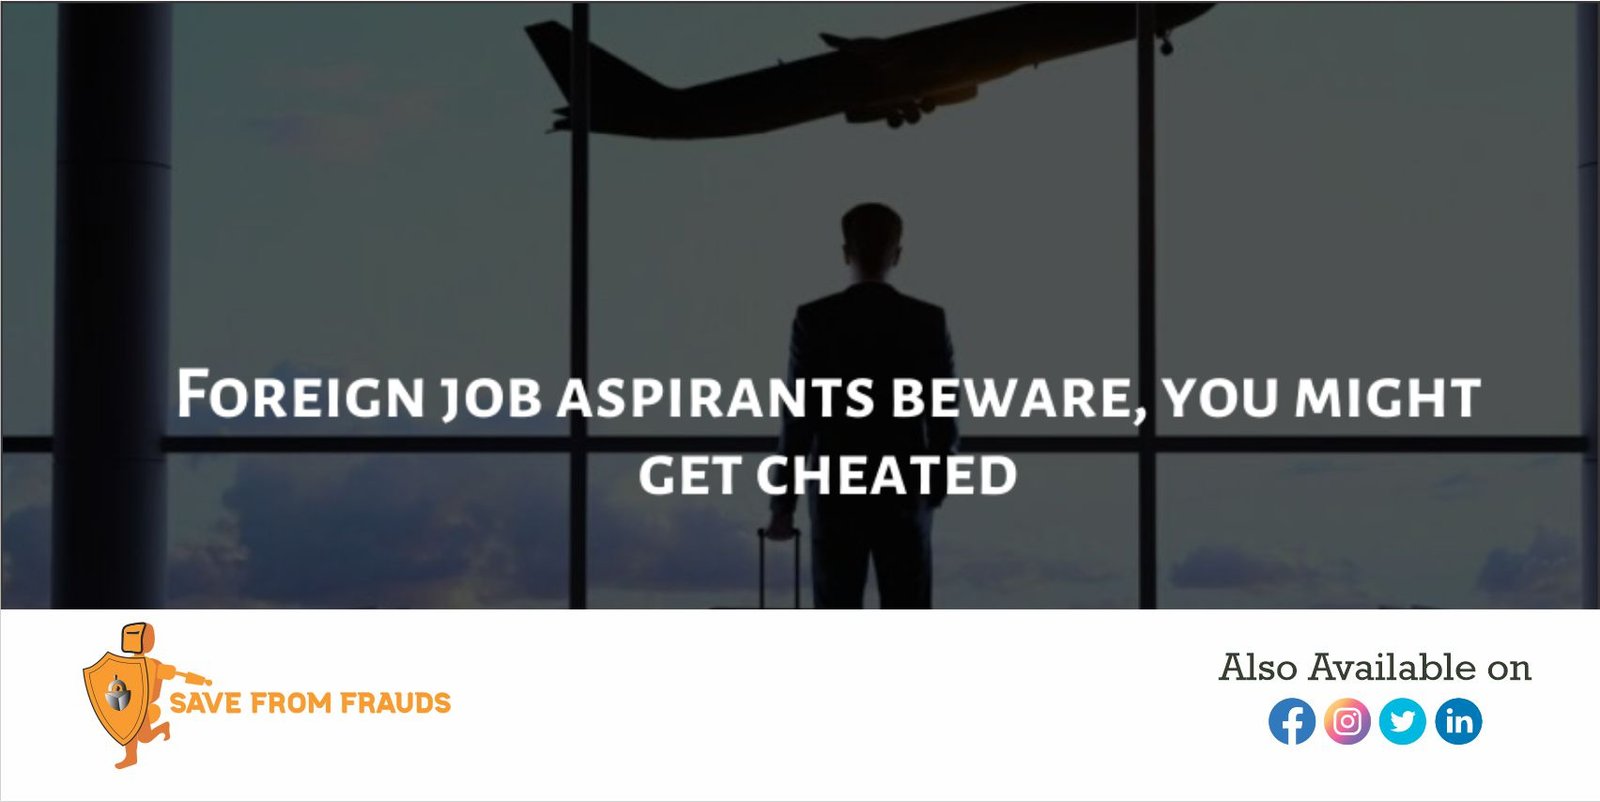 Beware Foreign job aspirants beware, you might get cheated